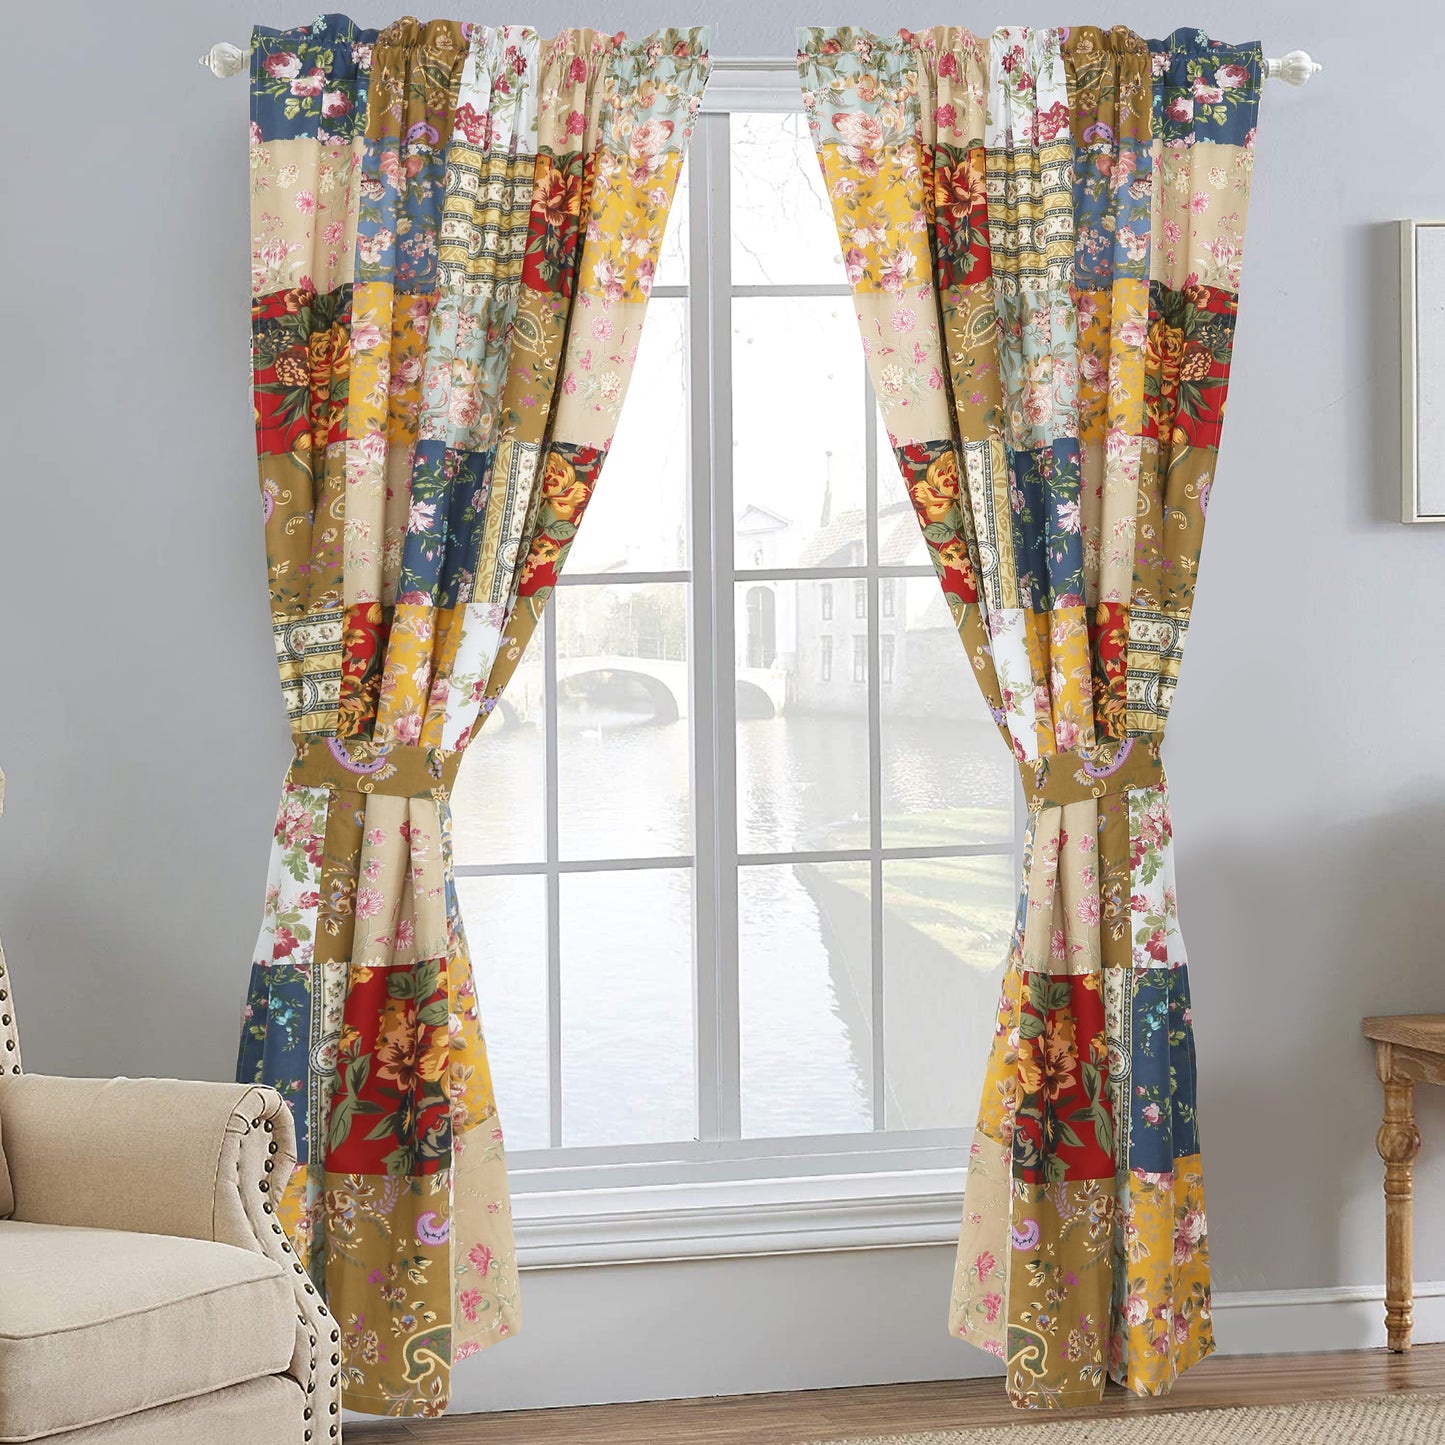 Ryleigh Floral Patchwork Country Garden Fall Flowers Paisley Window Curtain Panel/Drapes